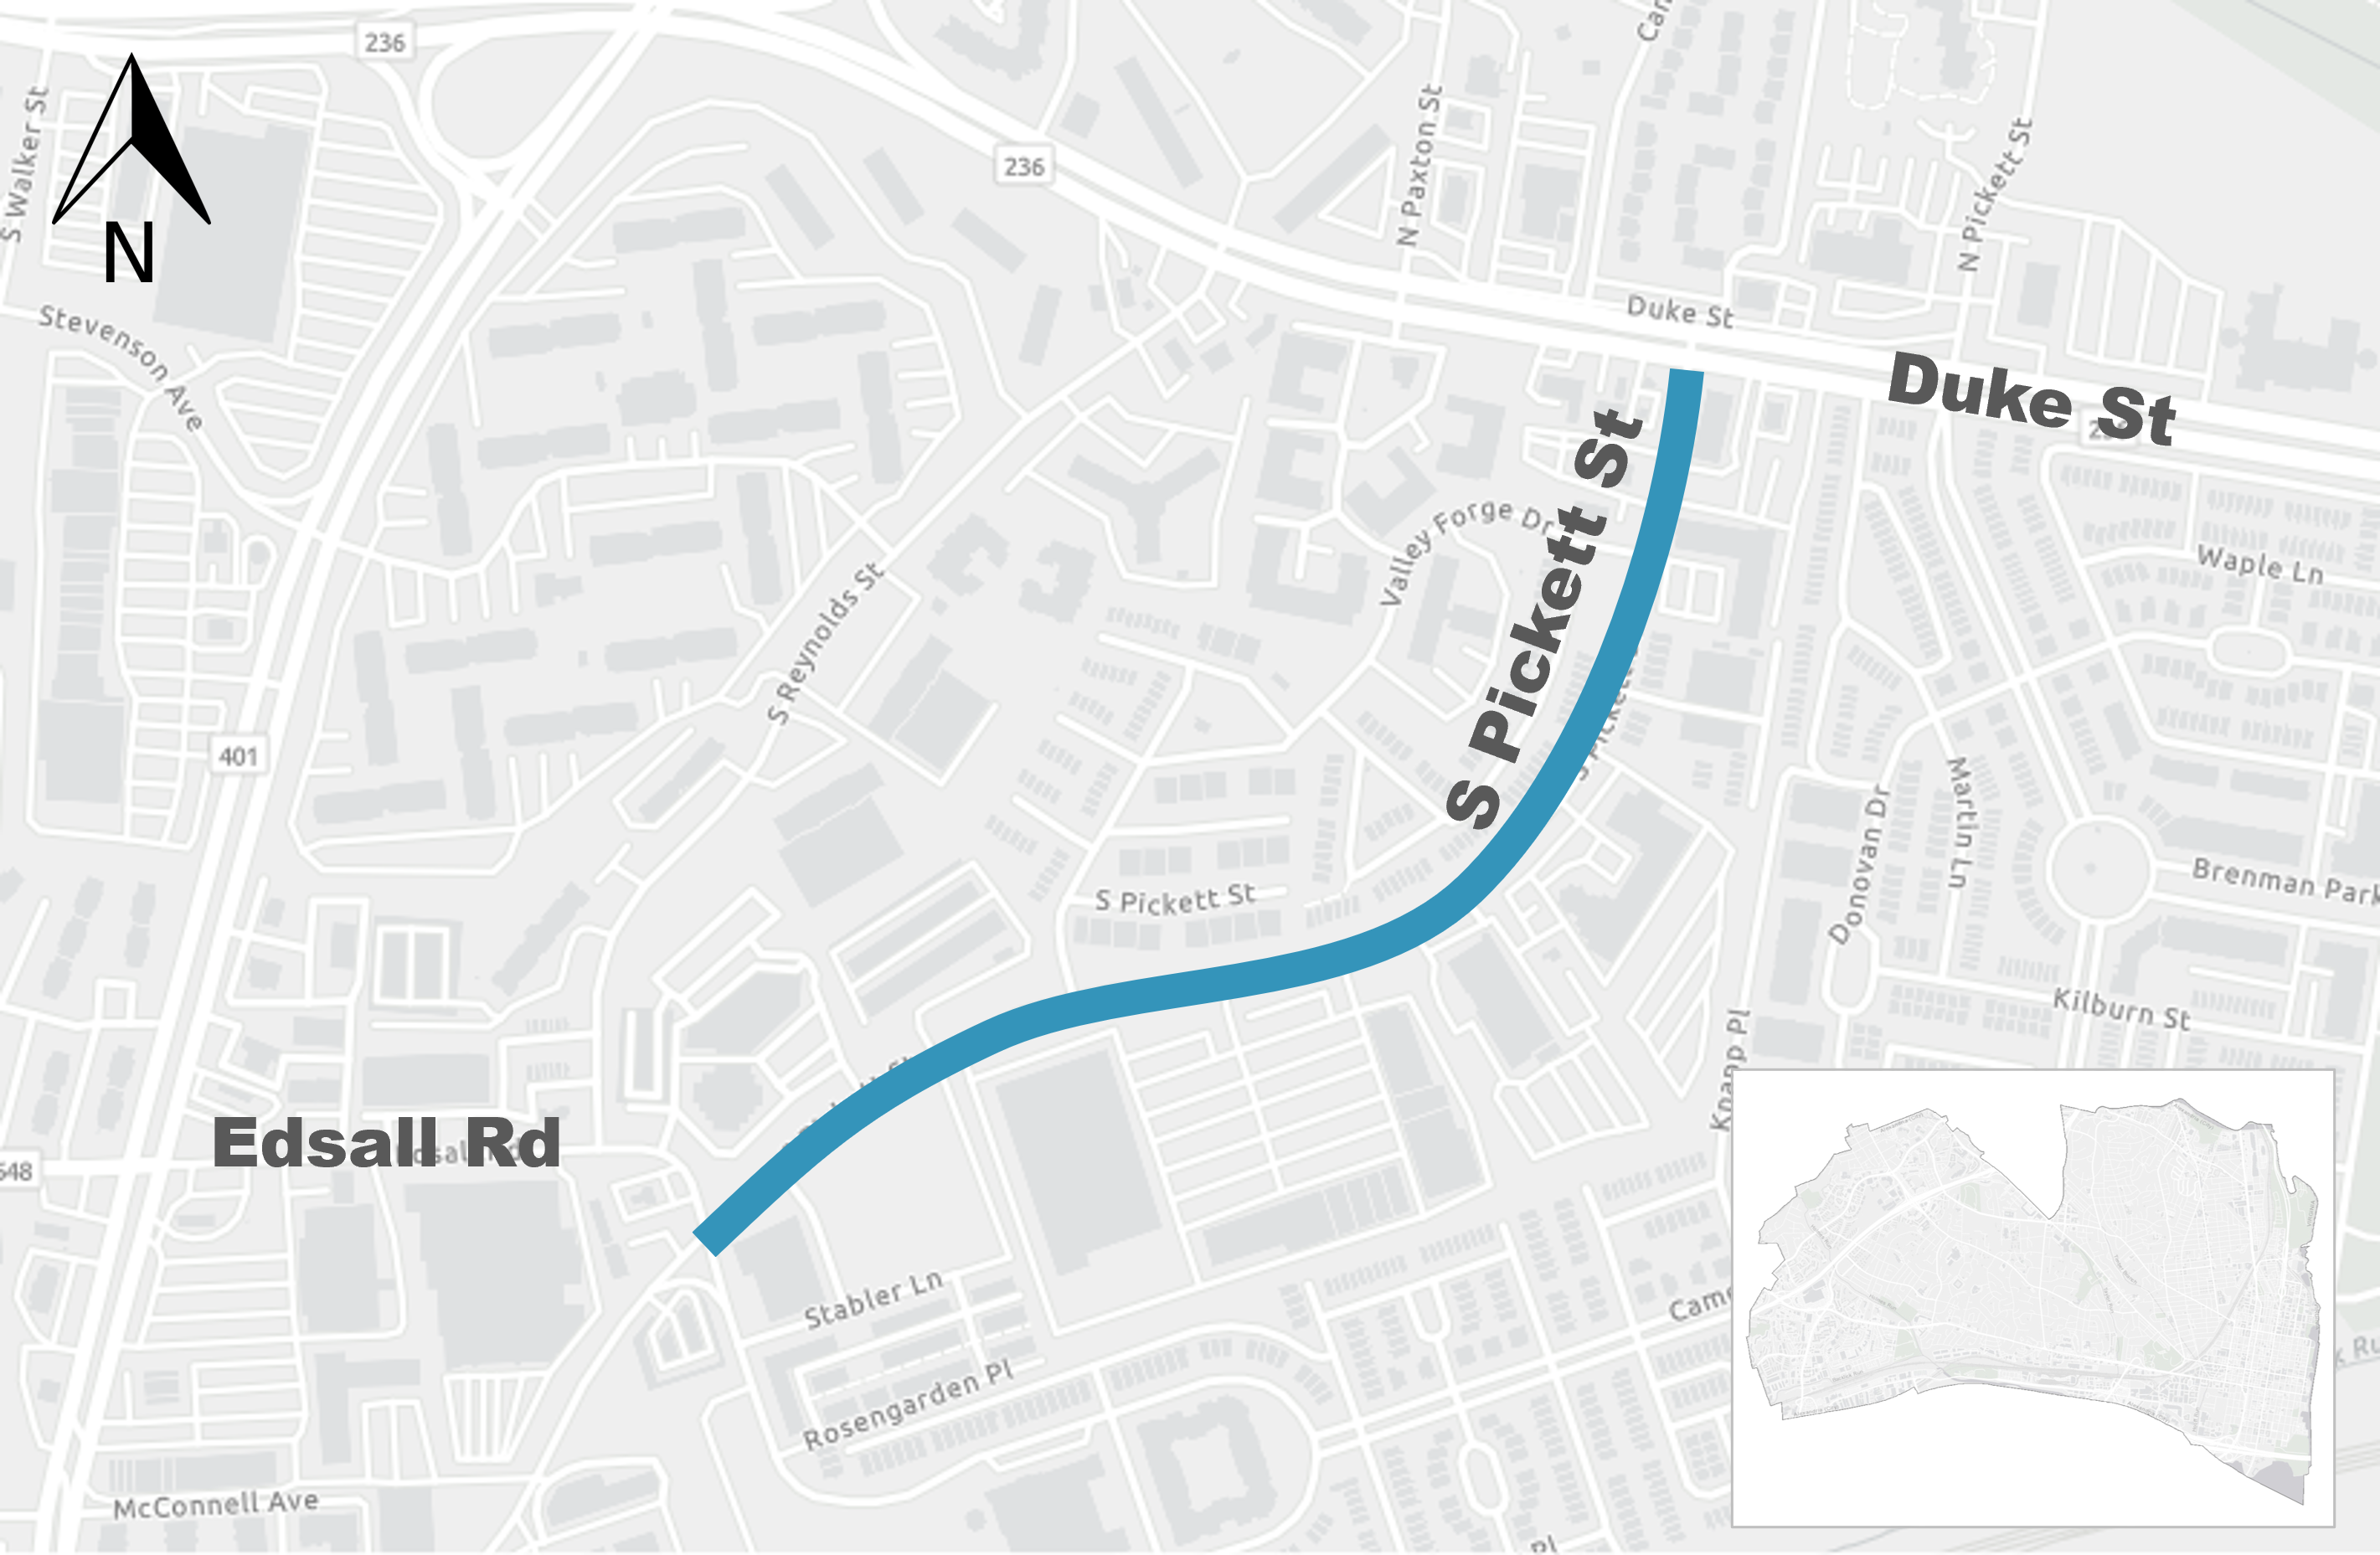 A map showing the project area, which is South Pickett Street between Duke Street and Edsall Road